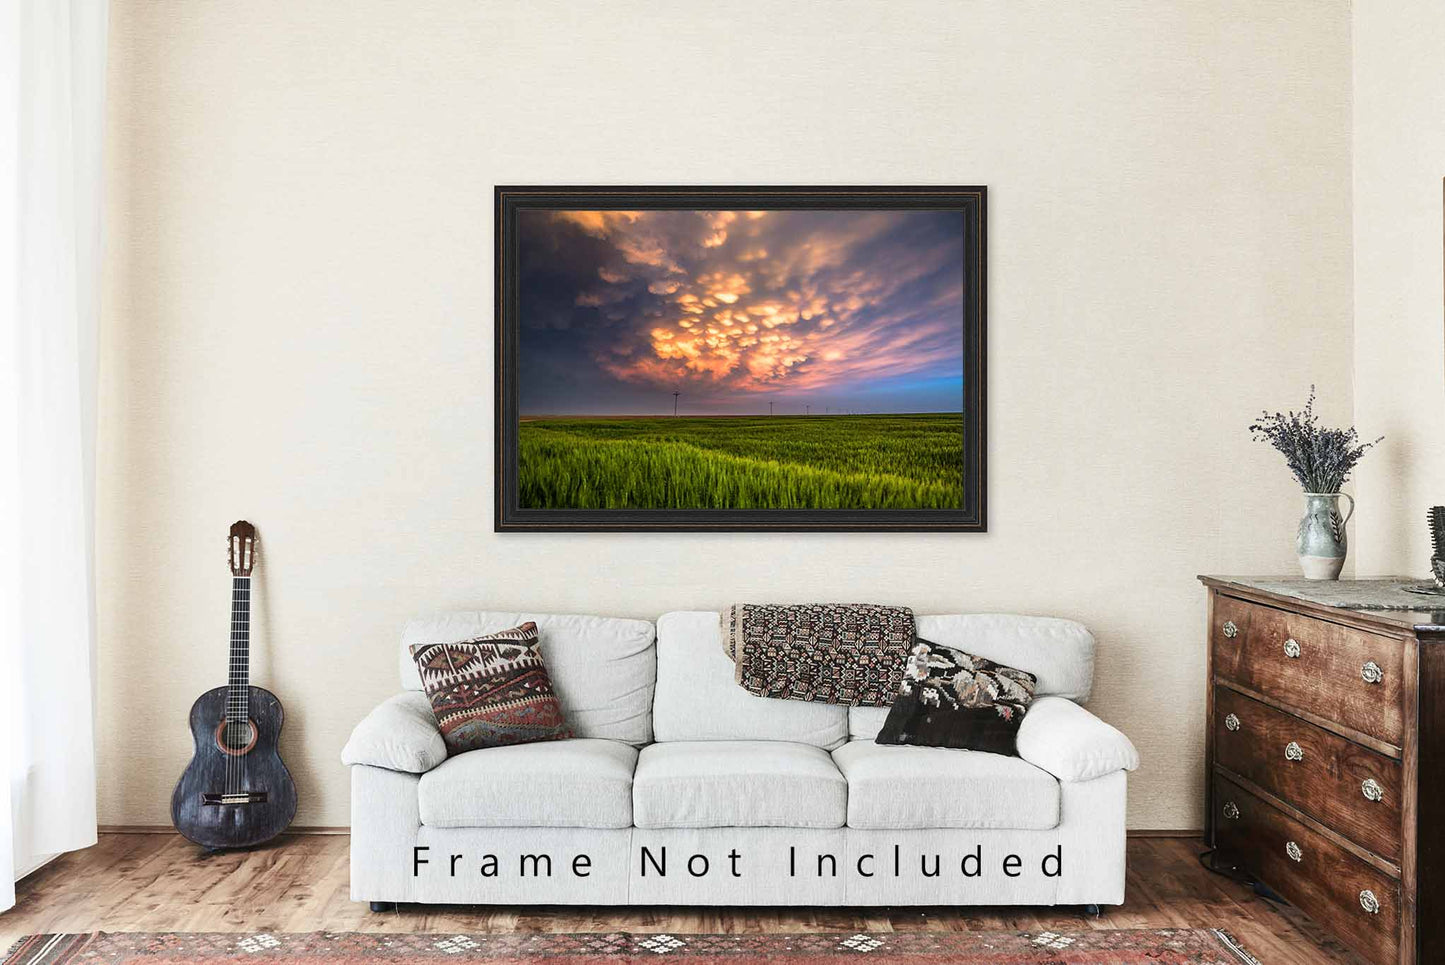 Fine Art Sky Photography Print - Picture of Sunlit Mammatus Clouds Over Fields in Western Kansas Nature Photograph Scenic Home Decor